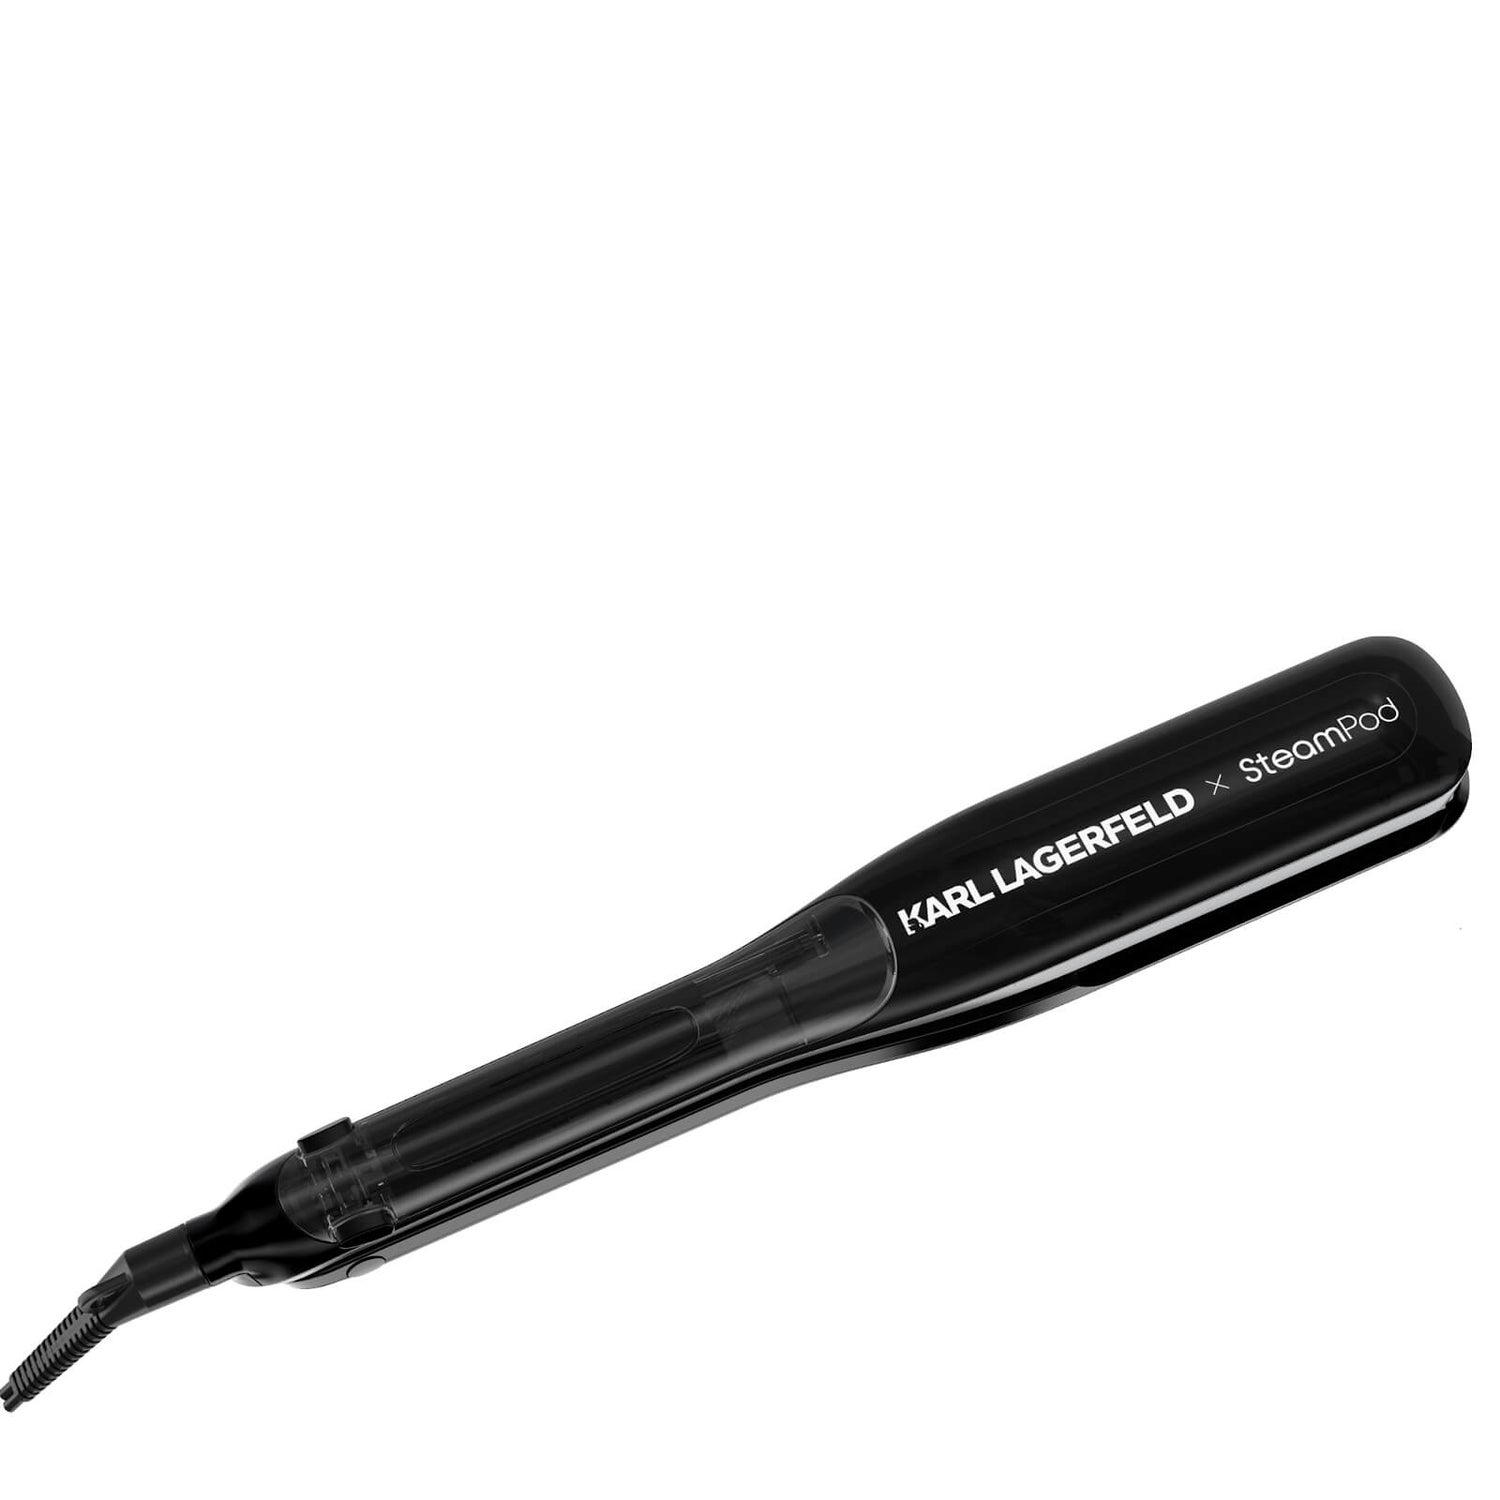 L'Oréal Professionnel Steampod 3.0 Limited Edition X Karl Lagerfeld Steam Hair Straightener and Styling Tool (UK Plug)